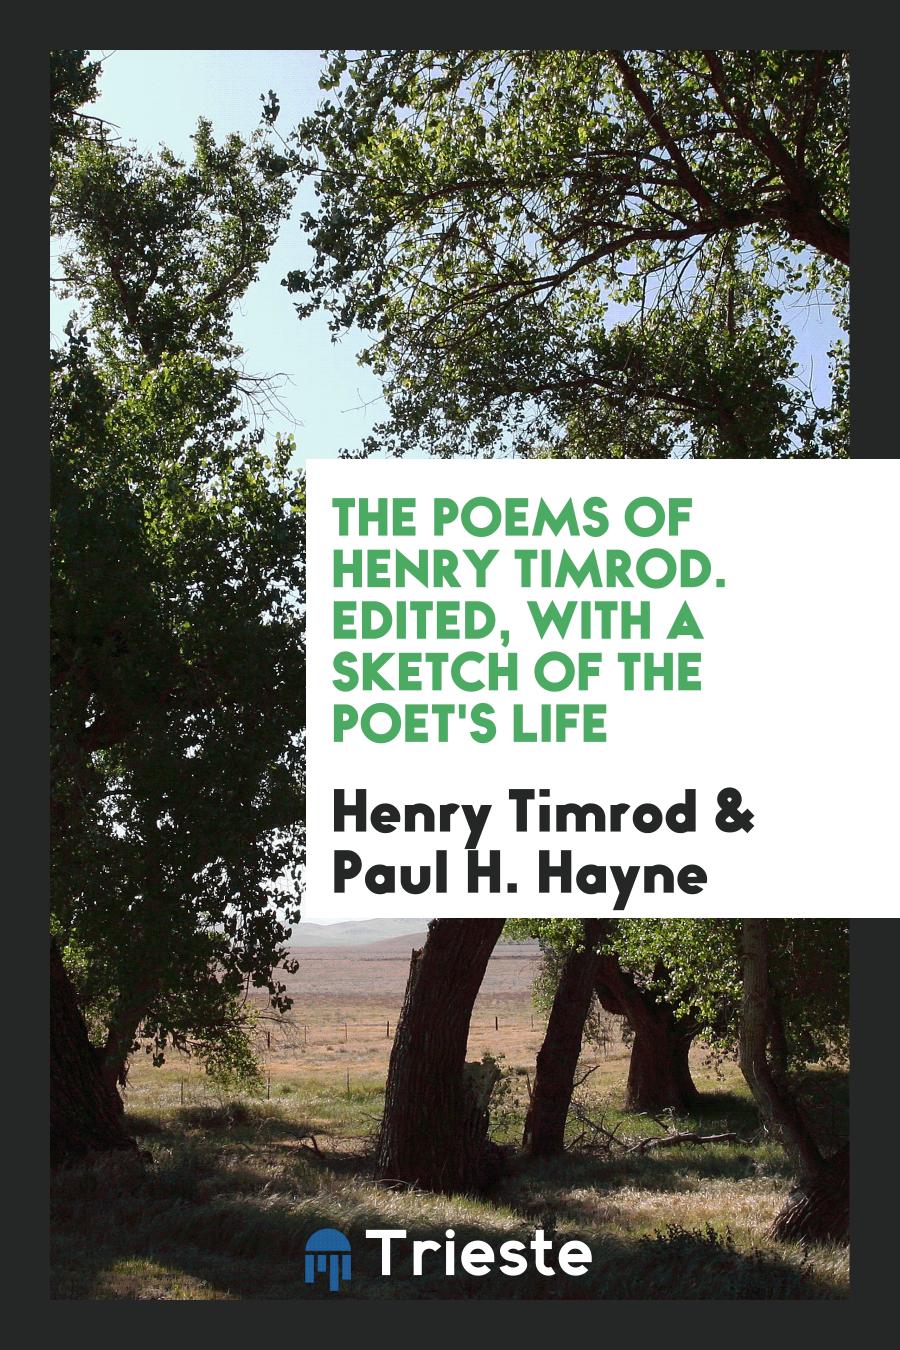 The Poems of Henry Timrod. Edited, with a Sketch of the Poet's Life